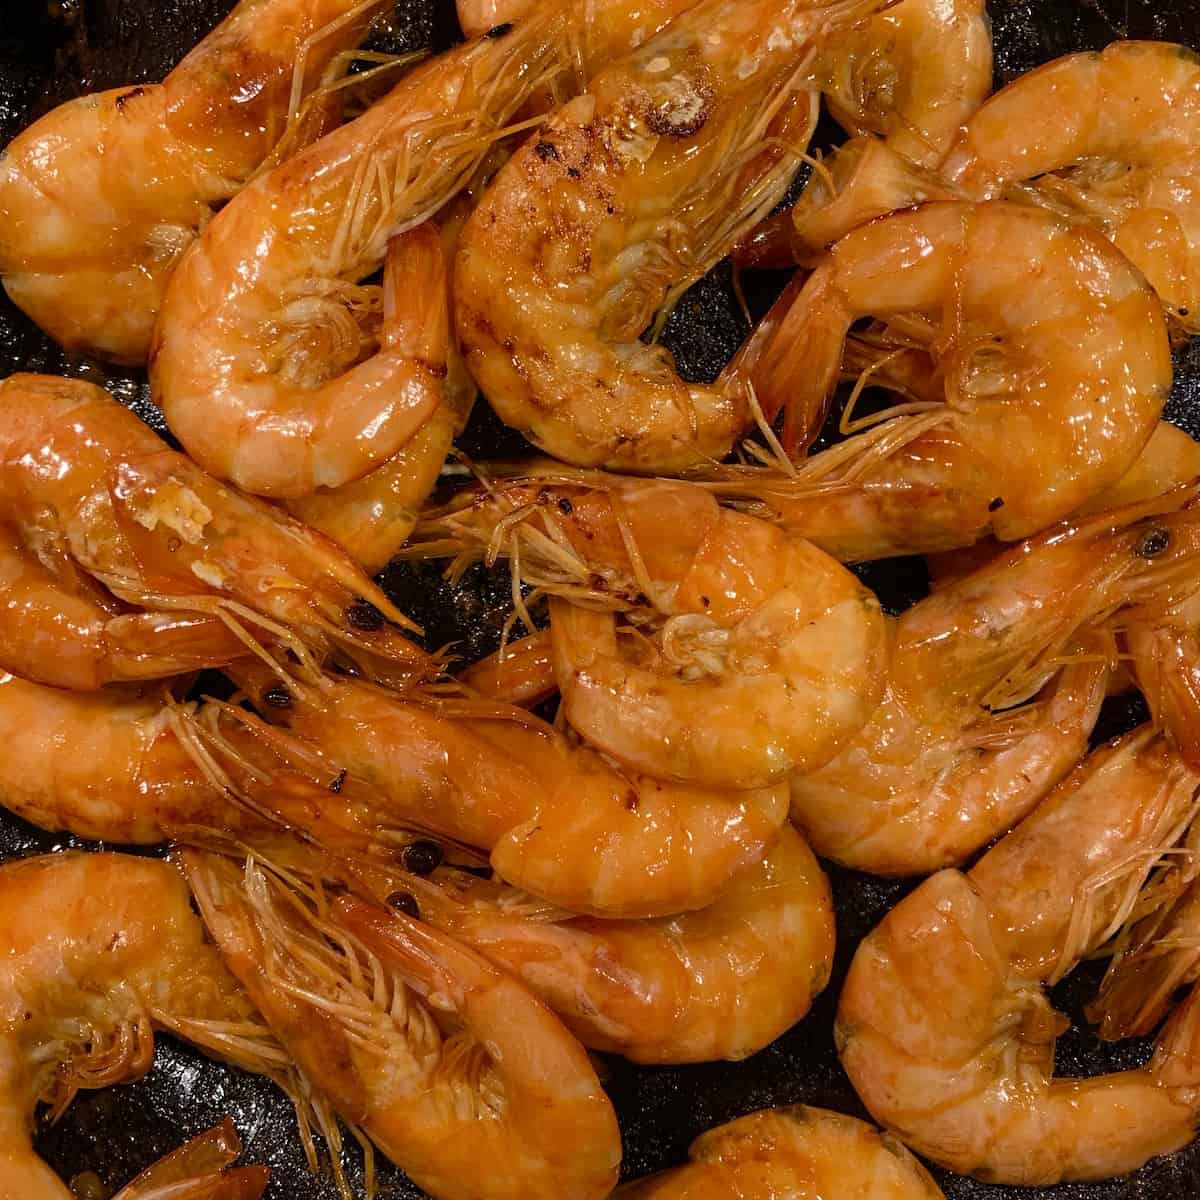 Cooked shrimp.